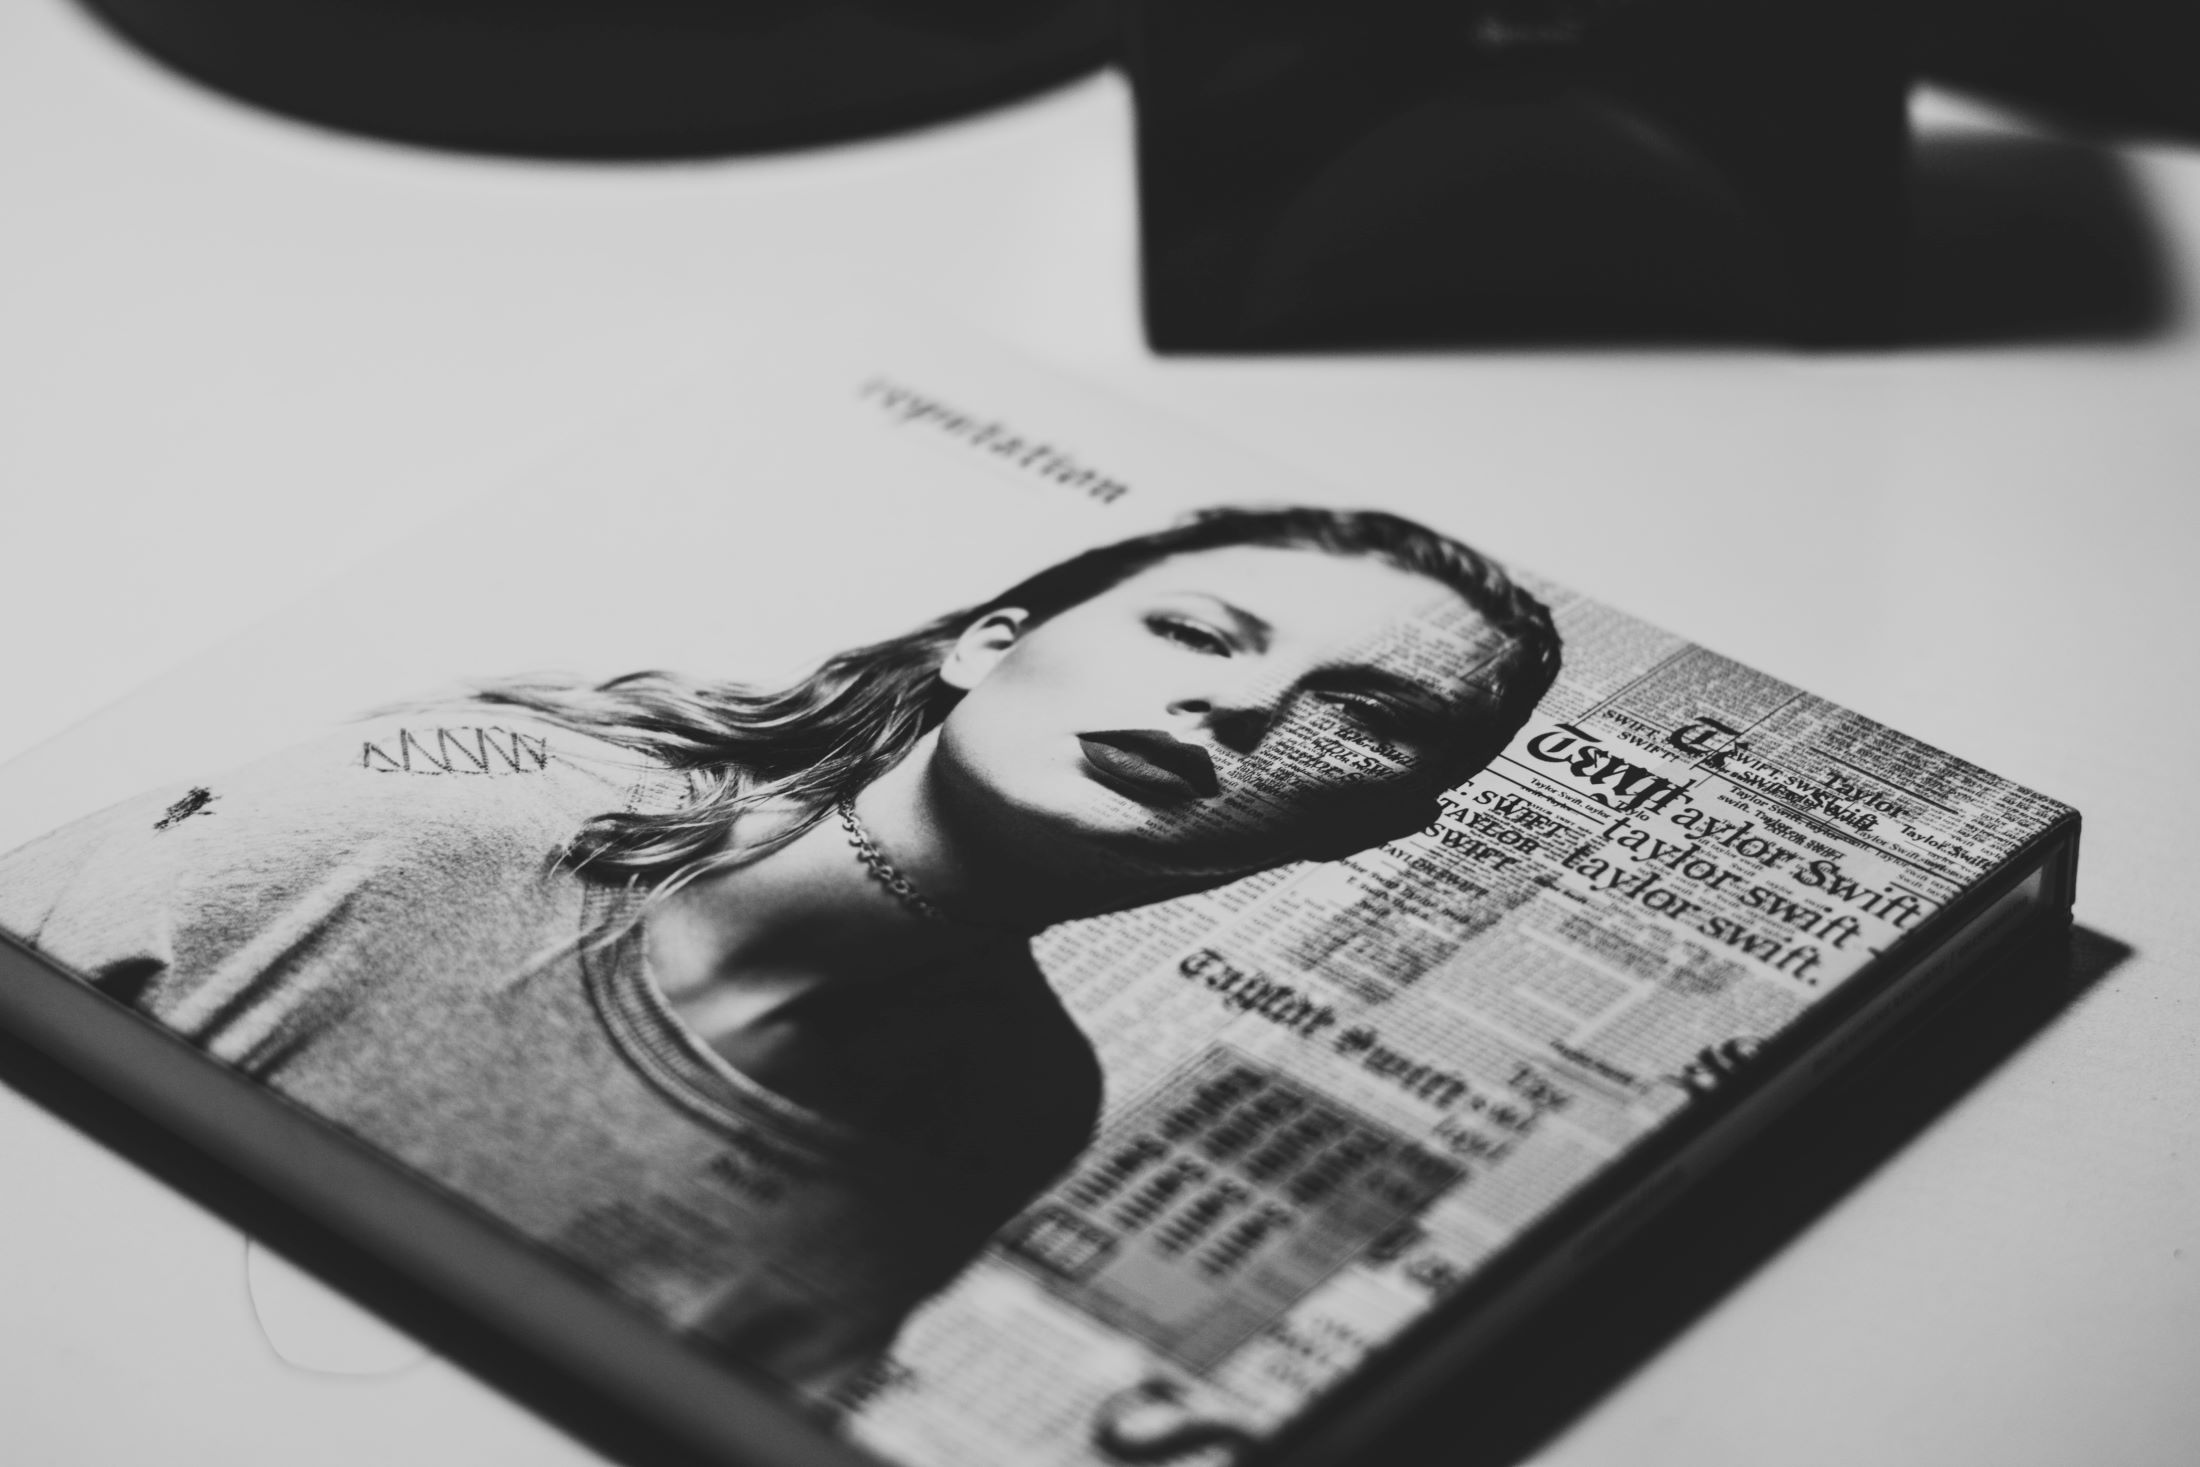 An image of a Taylor Swift CD.